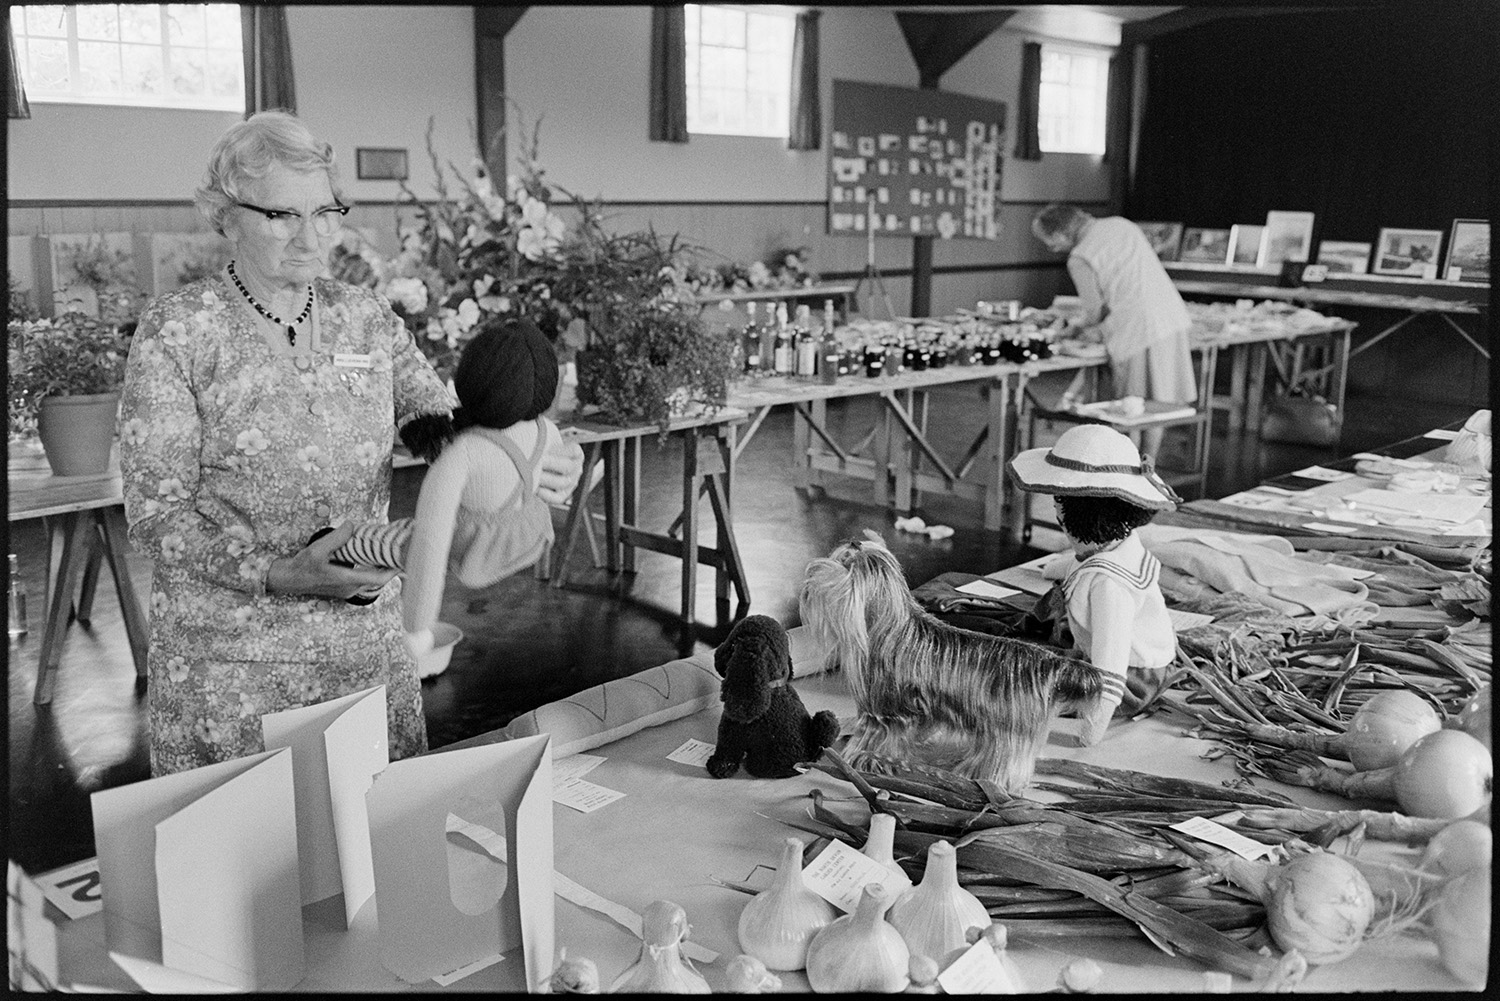 Vegetables, produce and cakes at flower show in village hall, French beans, onions, flowers.
[Woman judging exhibits at Dolton Flower Show in Dolton Village Hall, including a knitted doll. There are tables of flowers, vegetables, bottles and jams on display.]